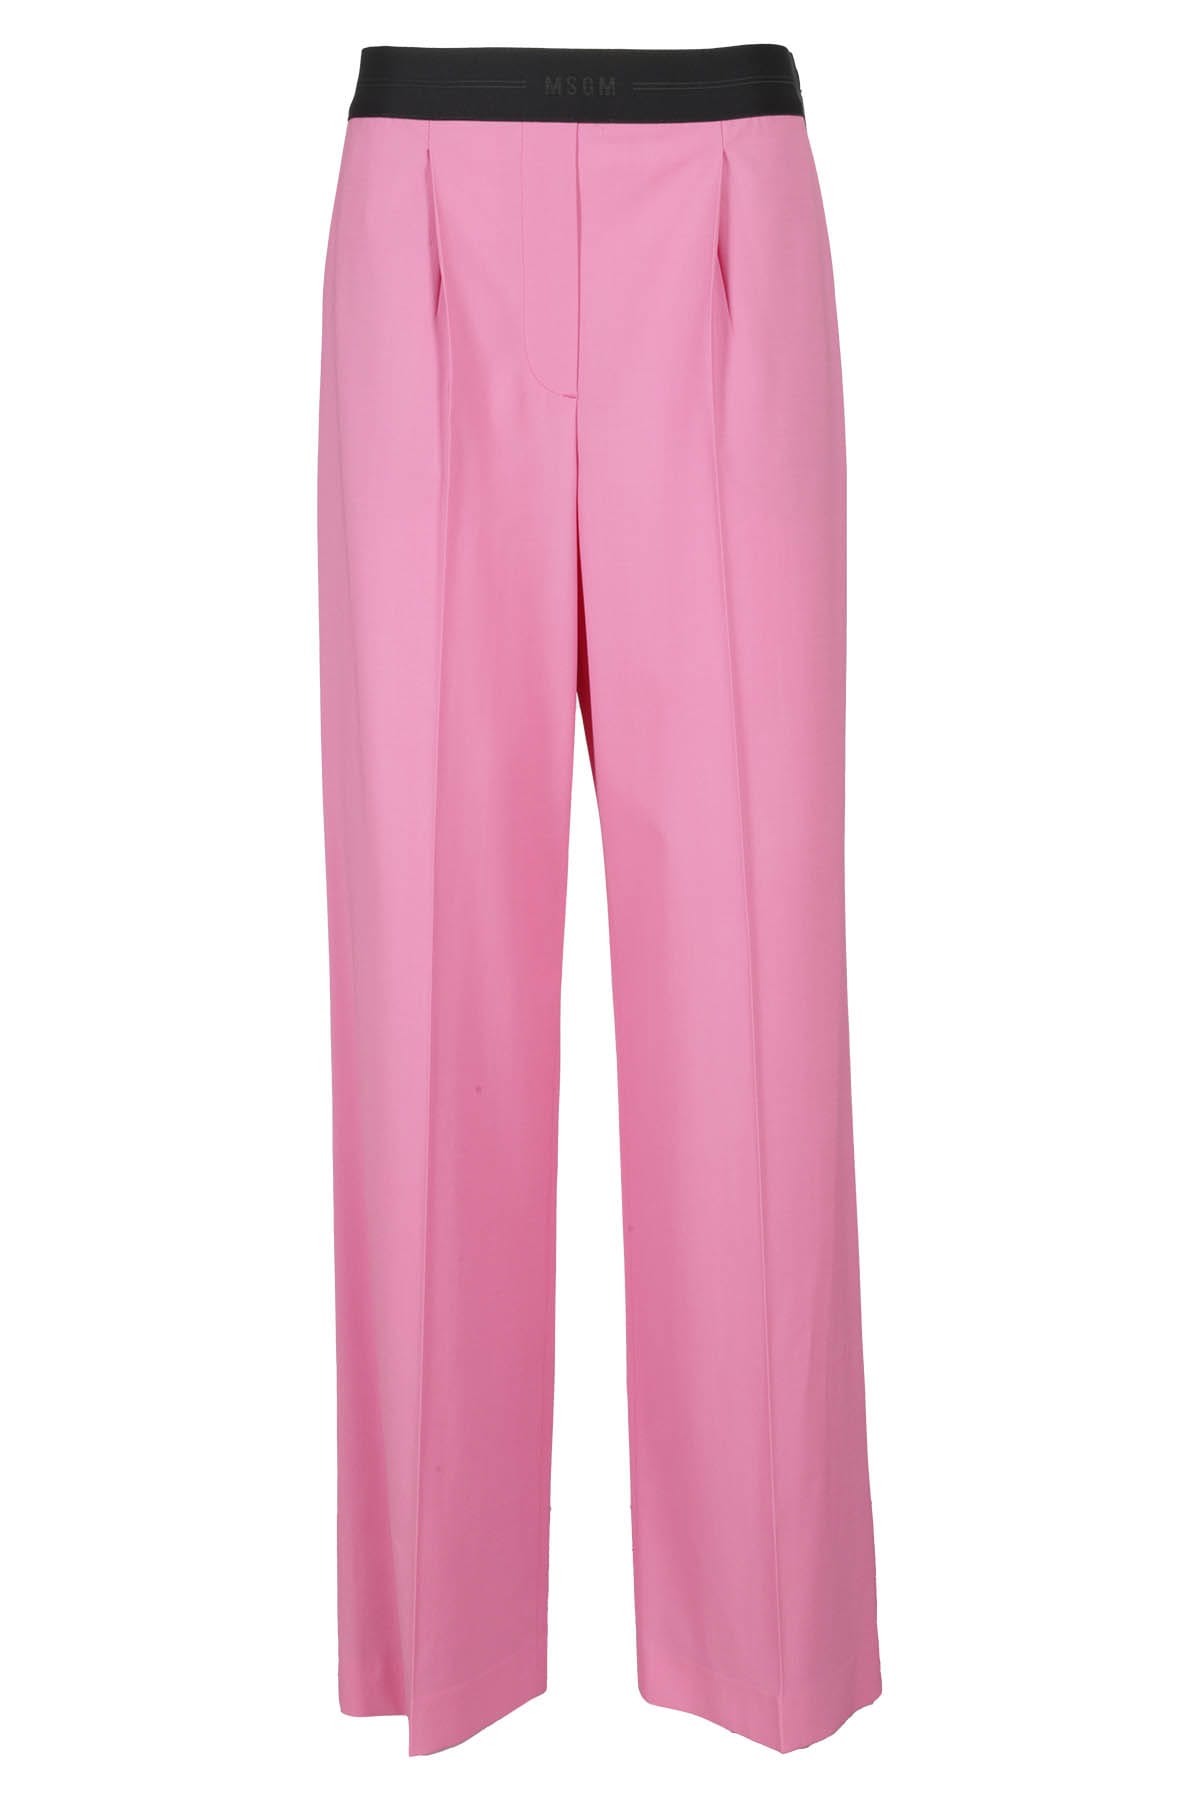 Msgm Pants In Rosa